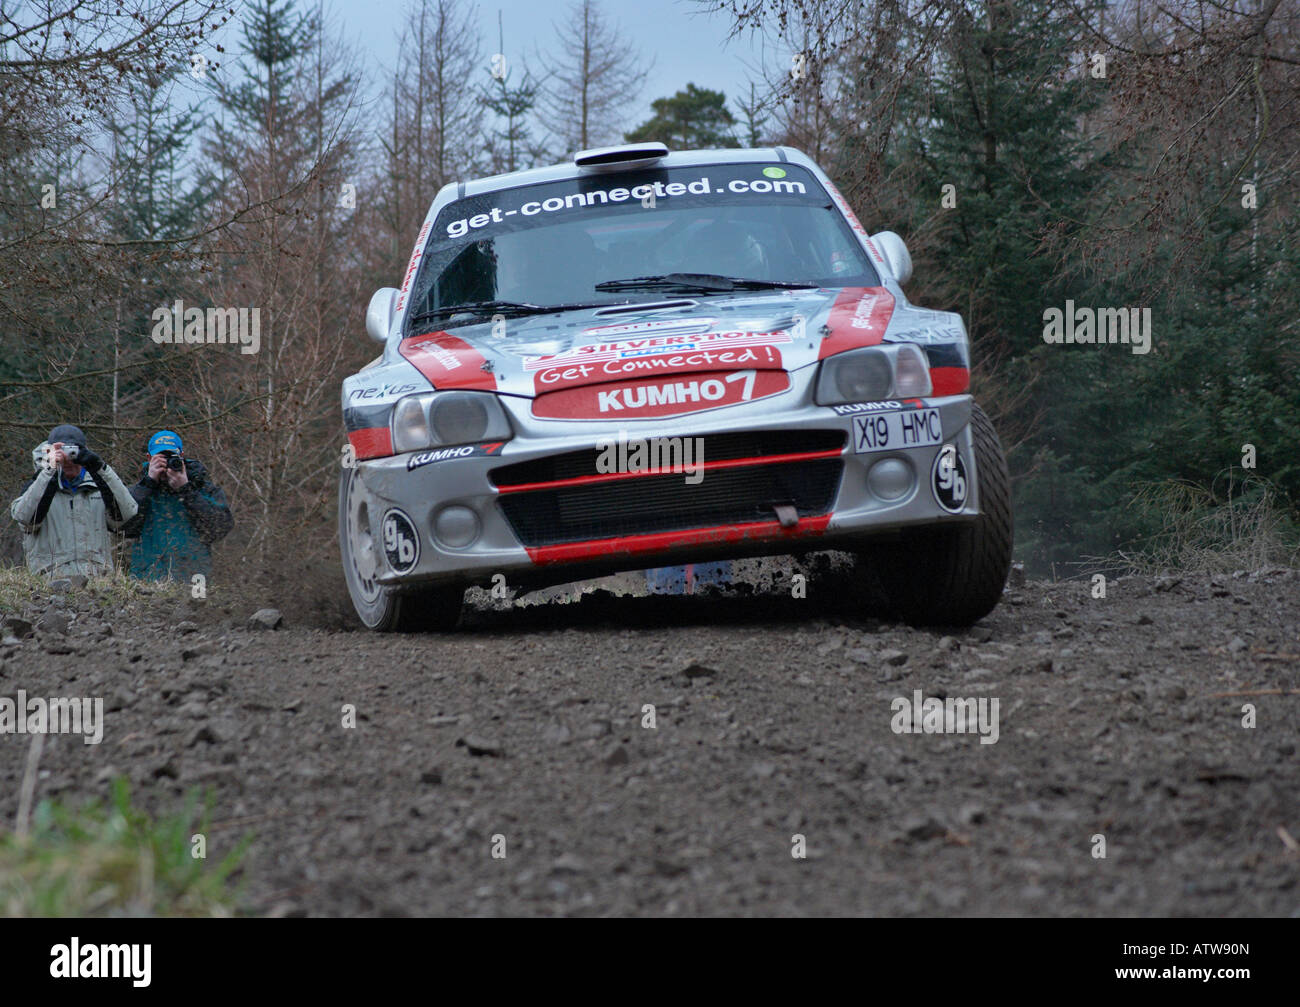 Rally Car on a special forest stage of a motor sport rally Stock Photo